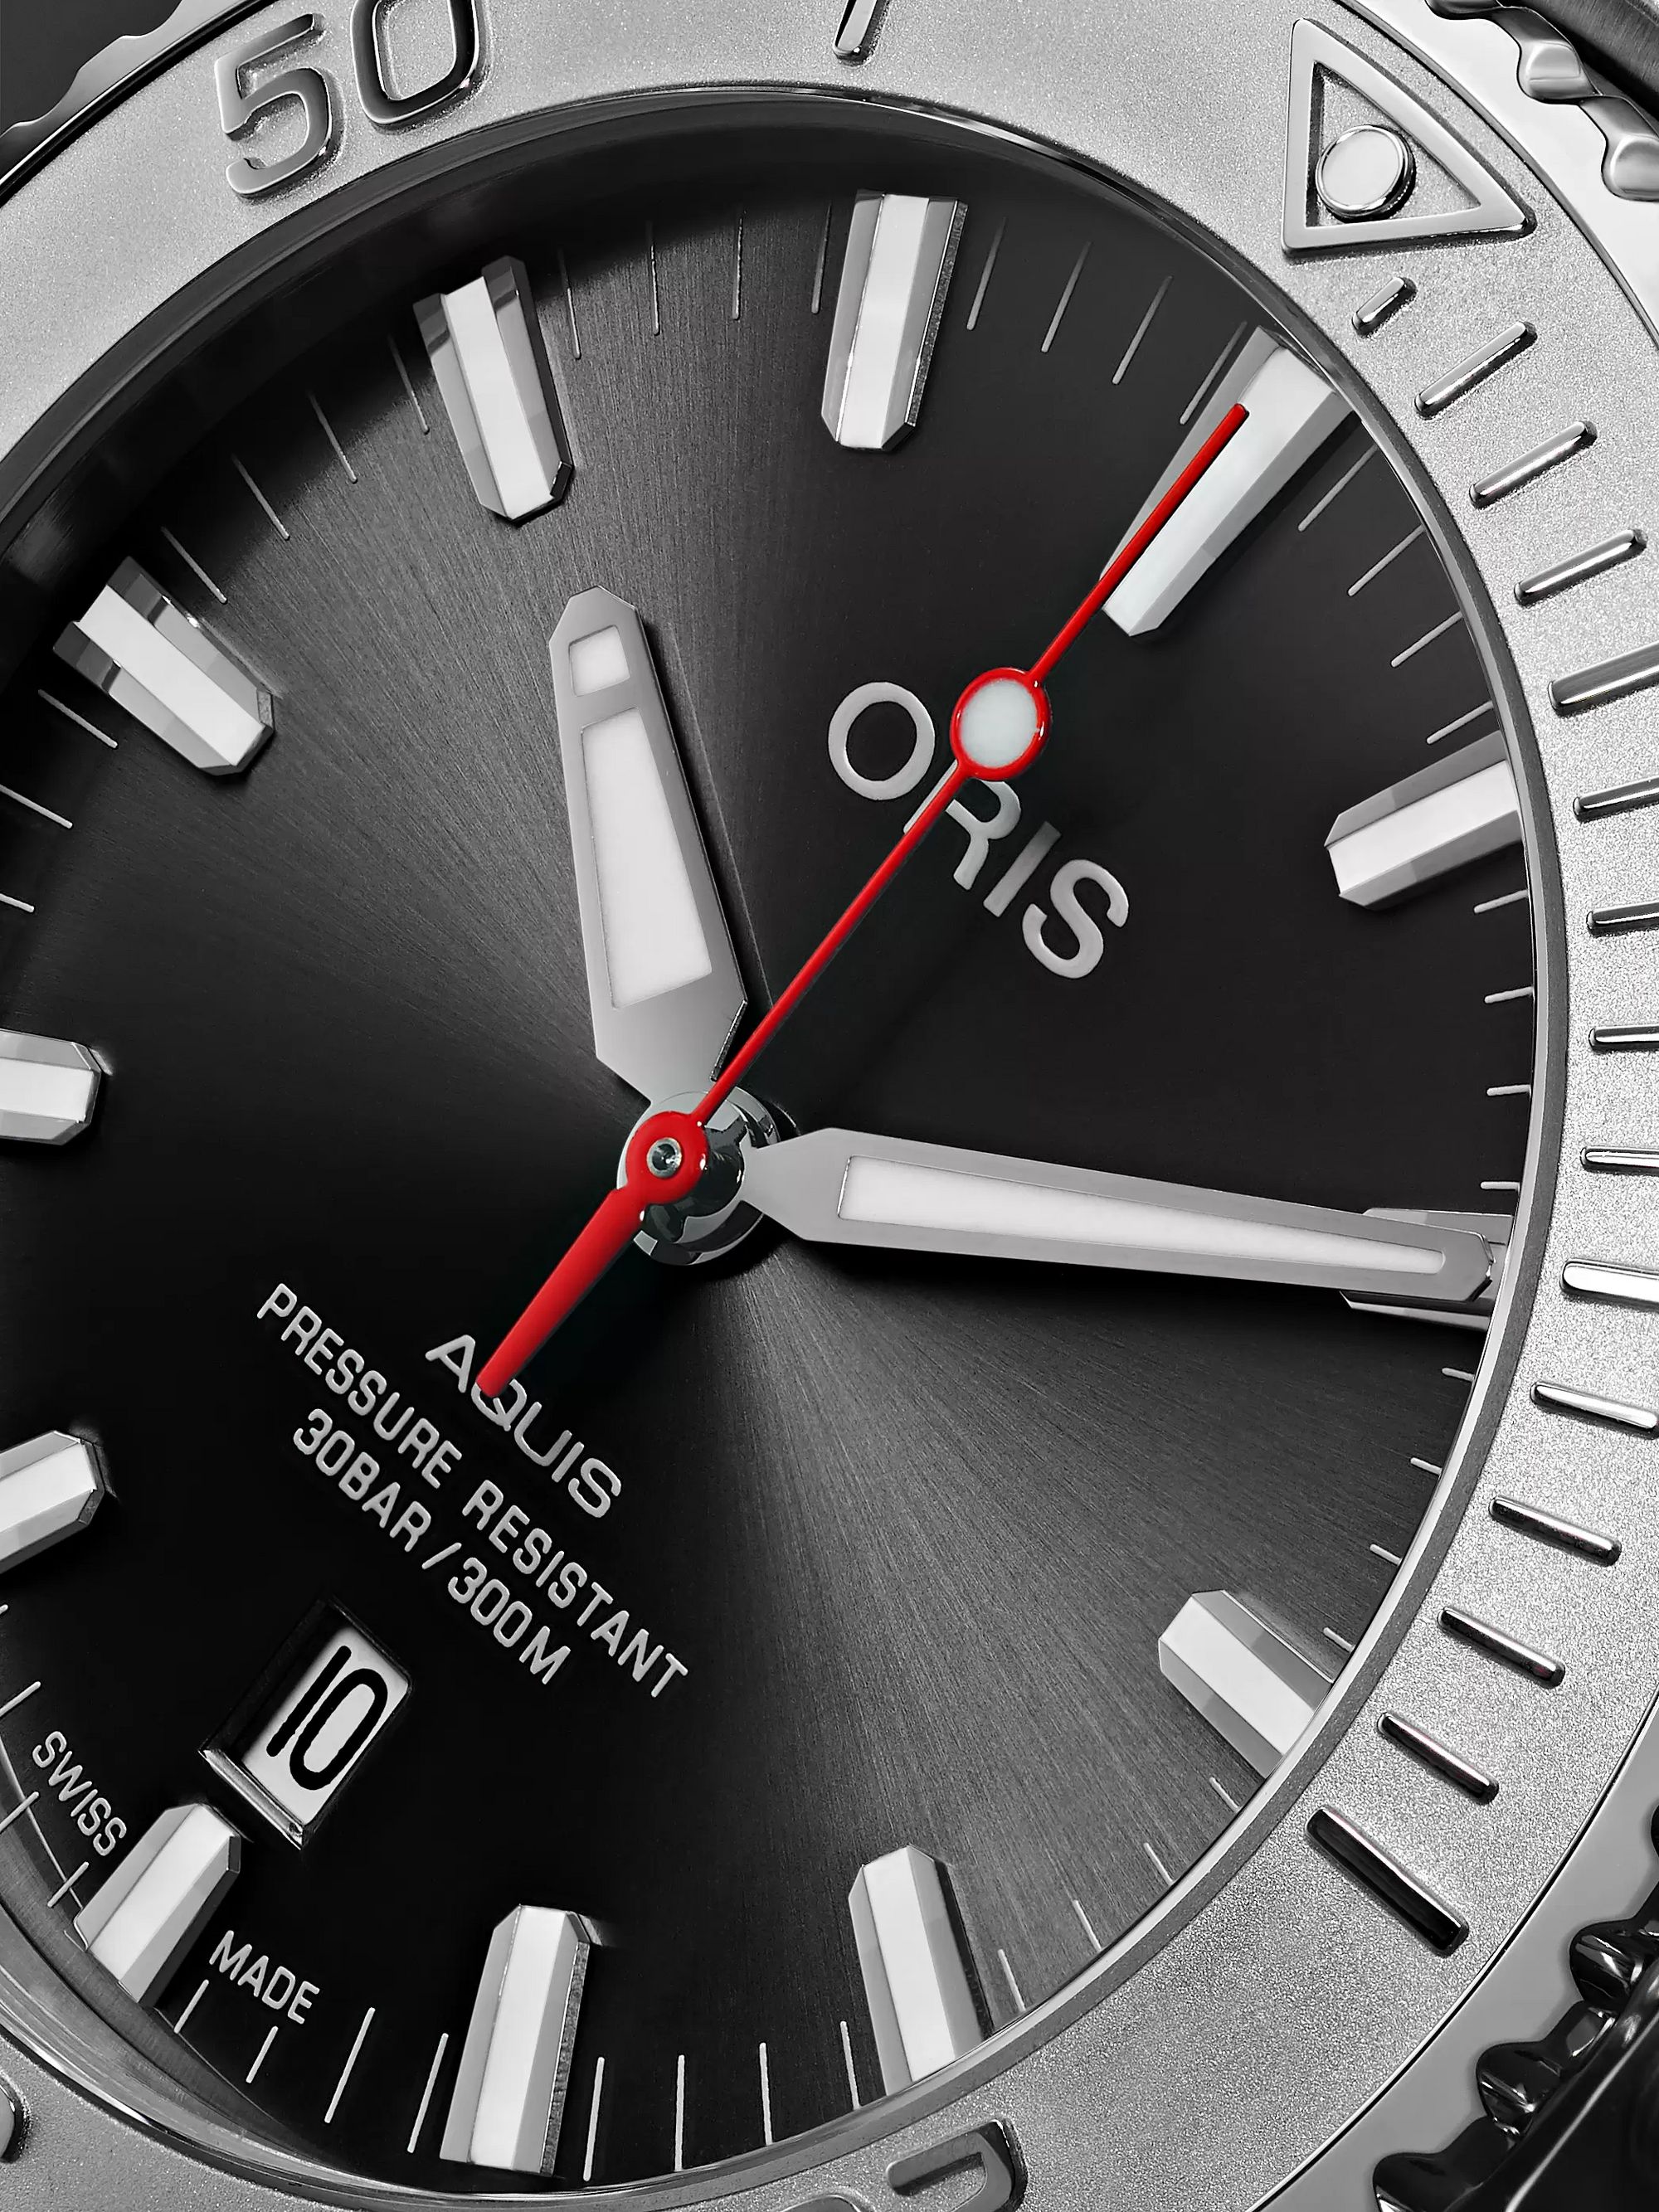 ORIS Aquis Date Relief Automatic 43.5mm Stainless Steel Watch, Ref. No. 01 733 7730 4153-07 8 24 05PEB